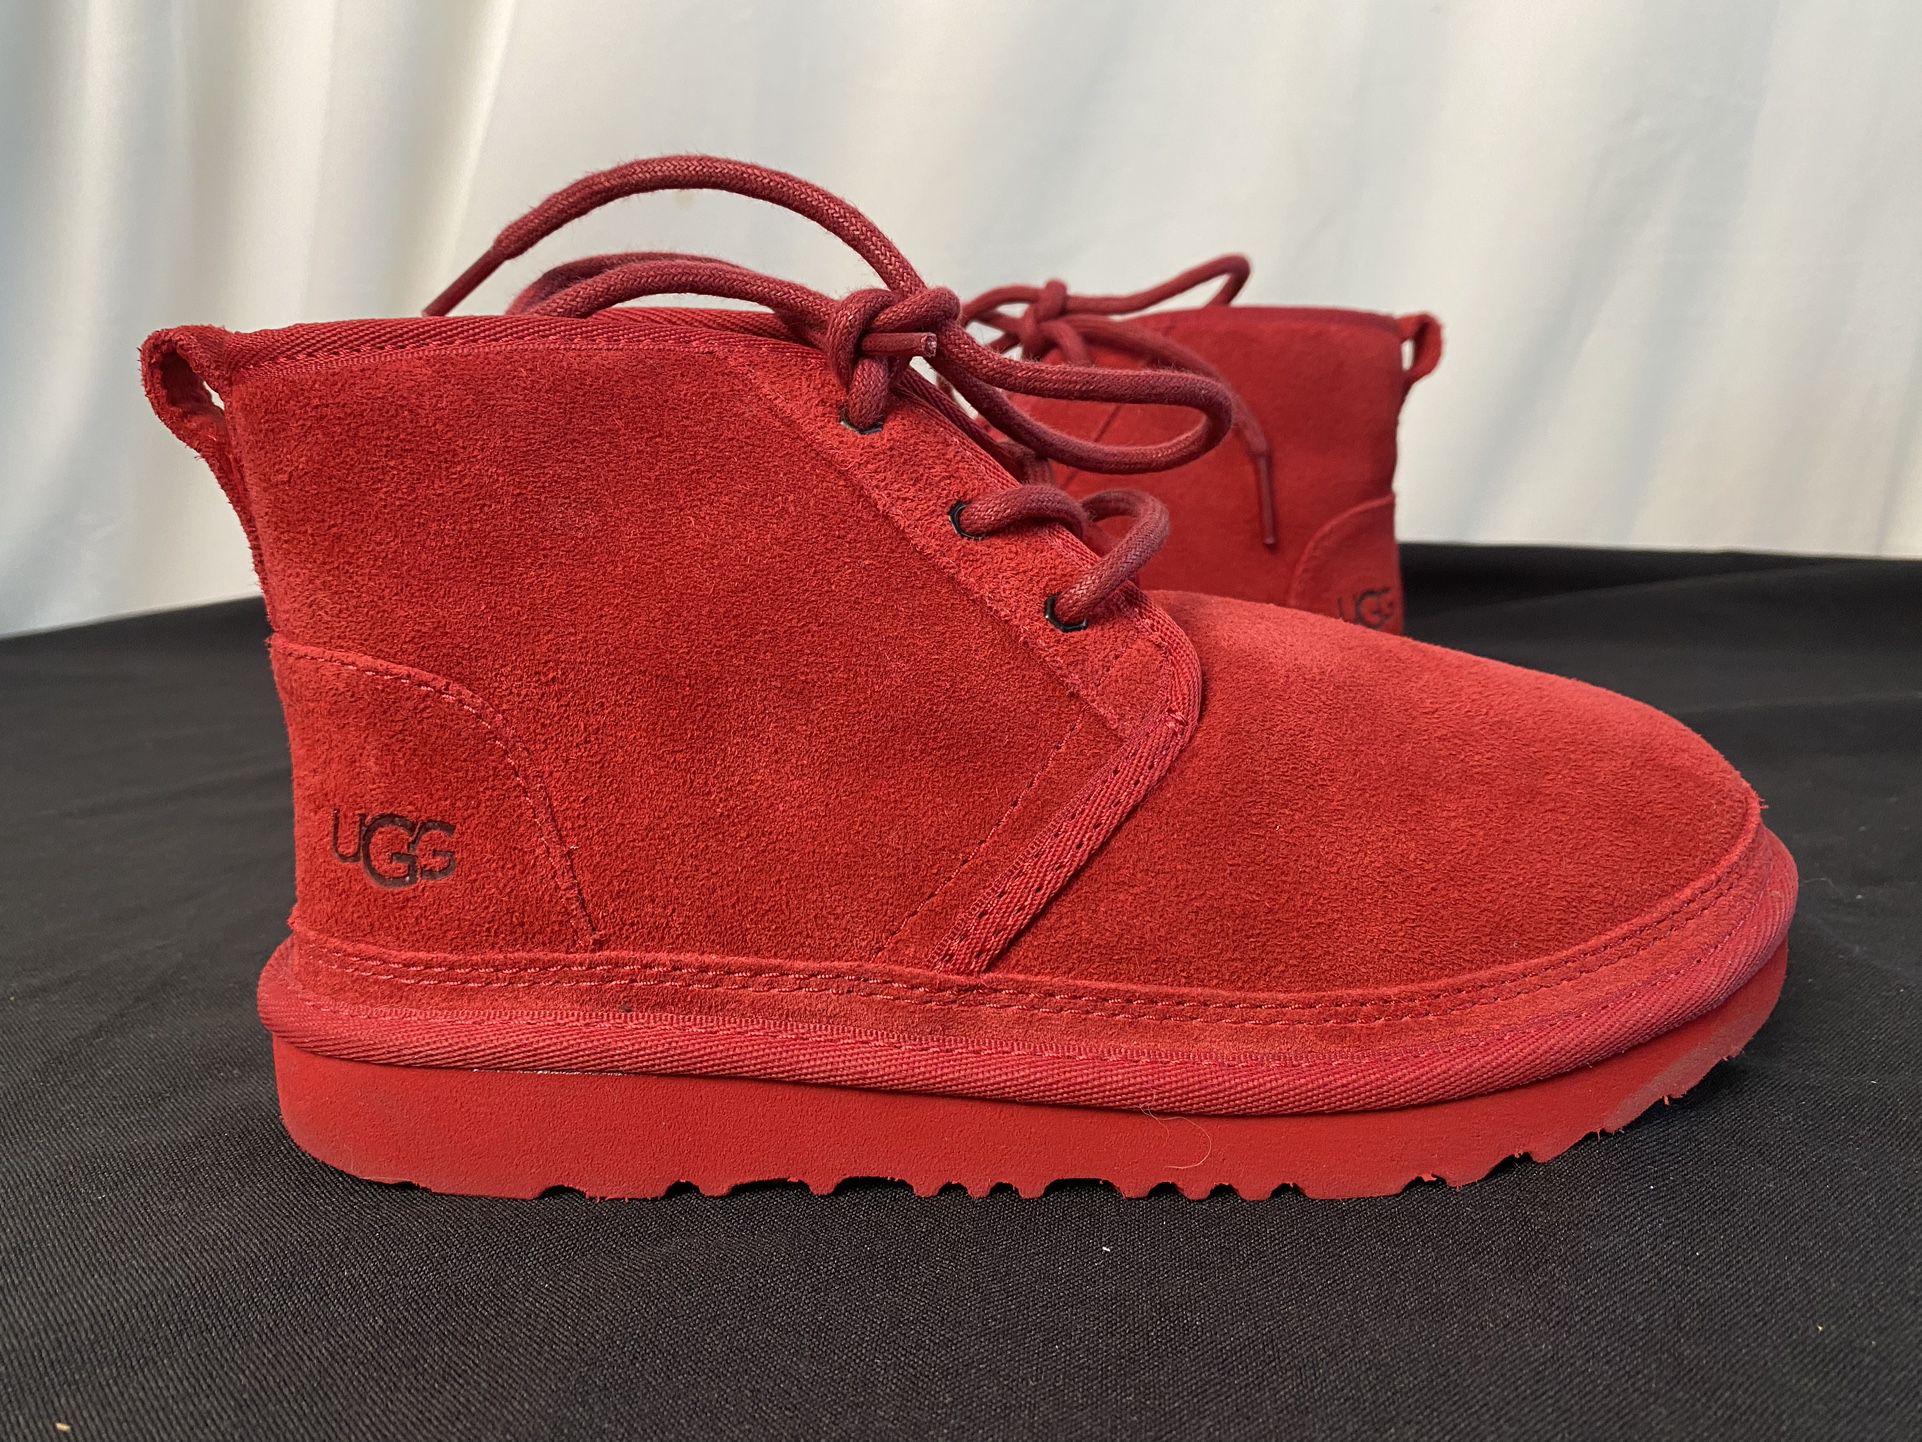 Youth Size 4 Red Chukka Boots Treadlite UGG Neumell II Seude & Sheep Skin Fur Lined (Worn Once!) (Retail $140)